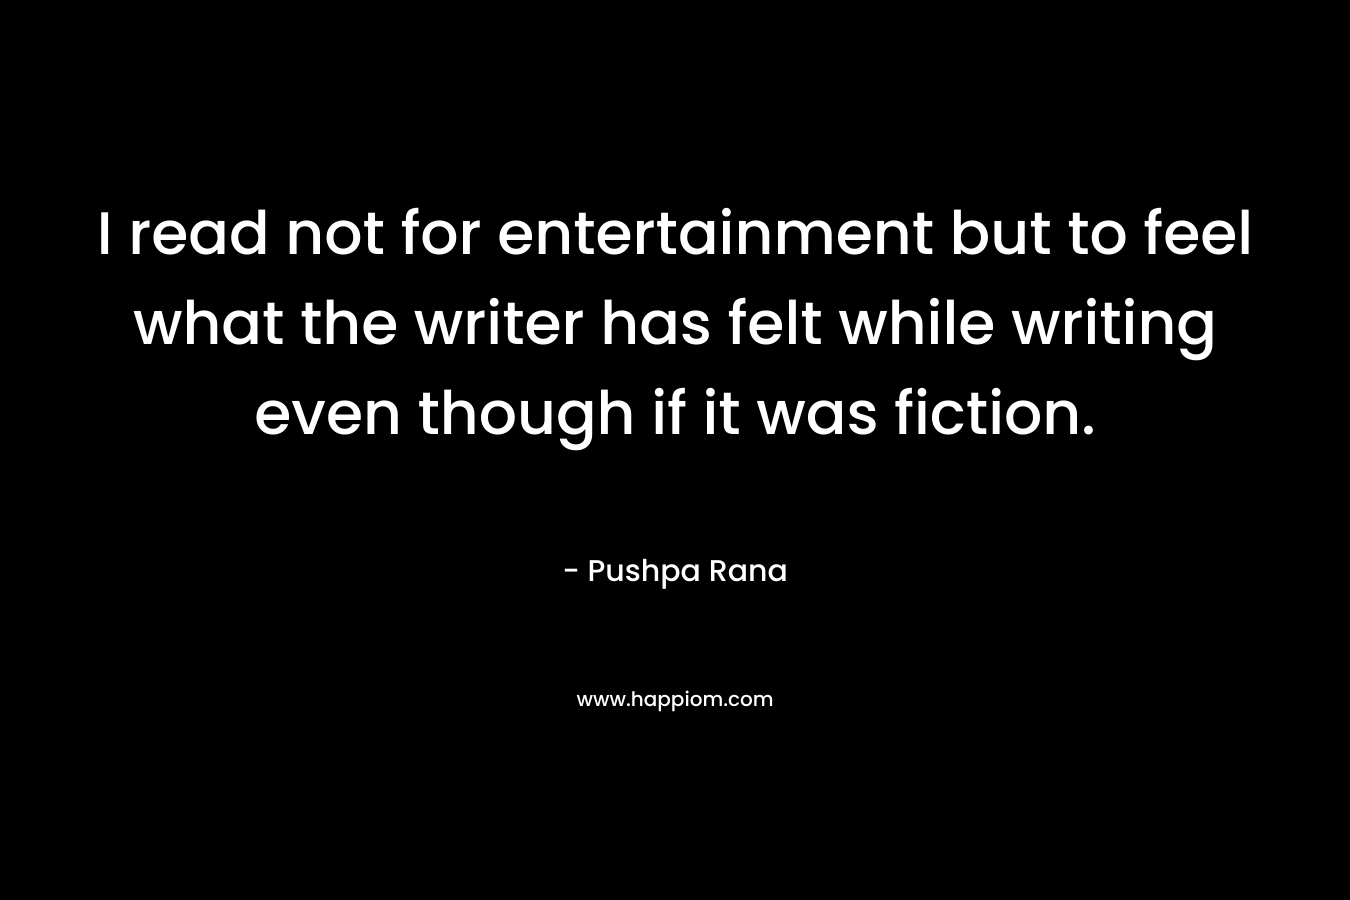 I read not for entertainment but to feel what the writer has felt while writing even though if it was fiction. – Pushpa Rana